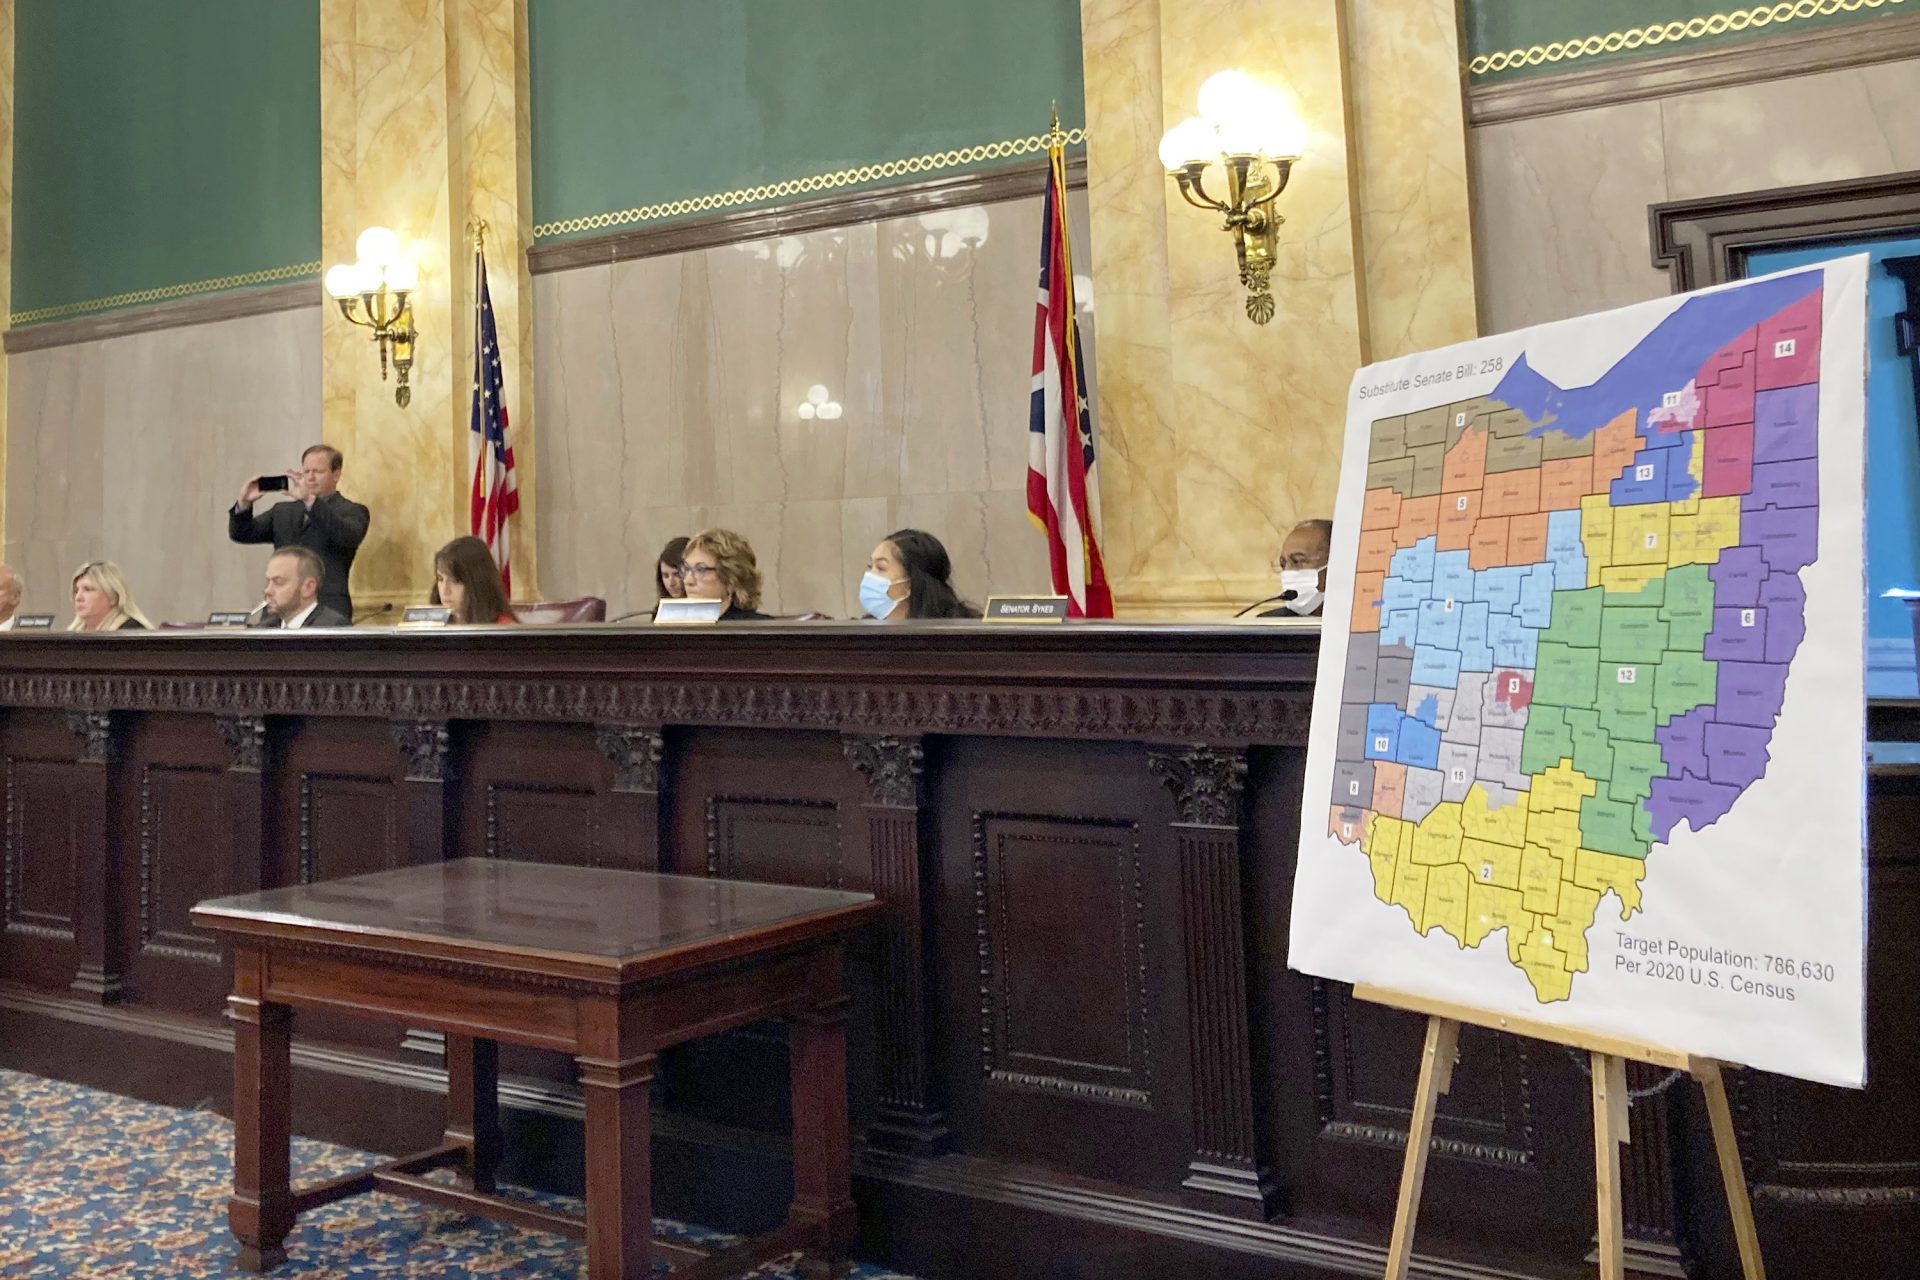 Members of the Ohio Senate Government Oversight Committee hear testimony on a new map of state congressional districts in this file photo from Nov. 16, 2021, at the Ohio Statehouse in Columbus, Ohio.